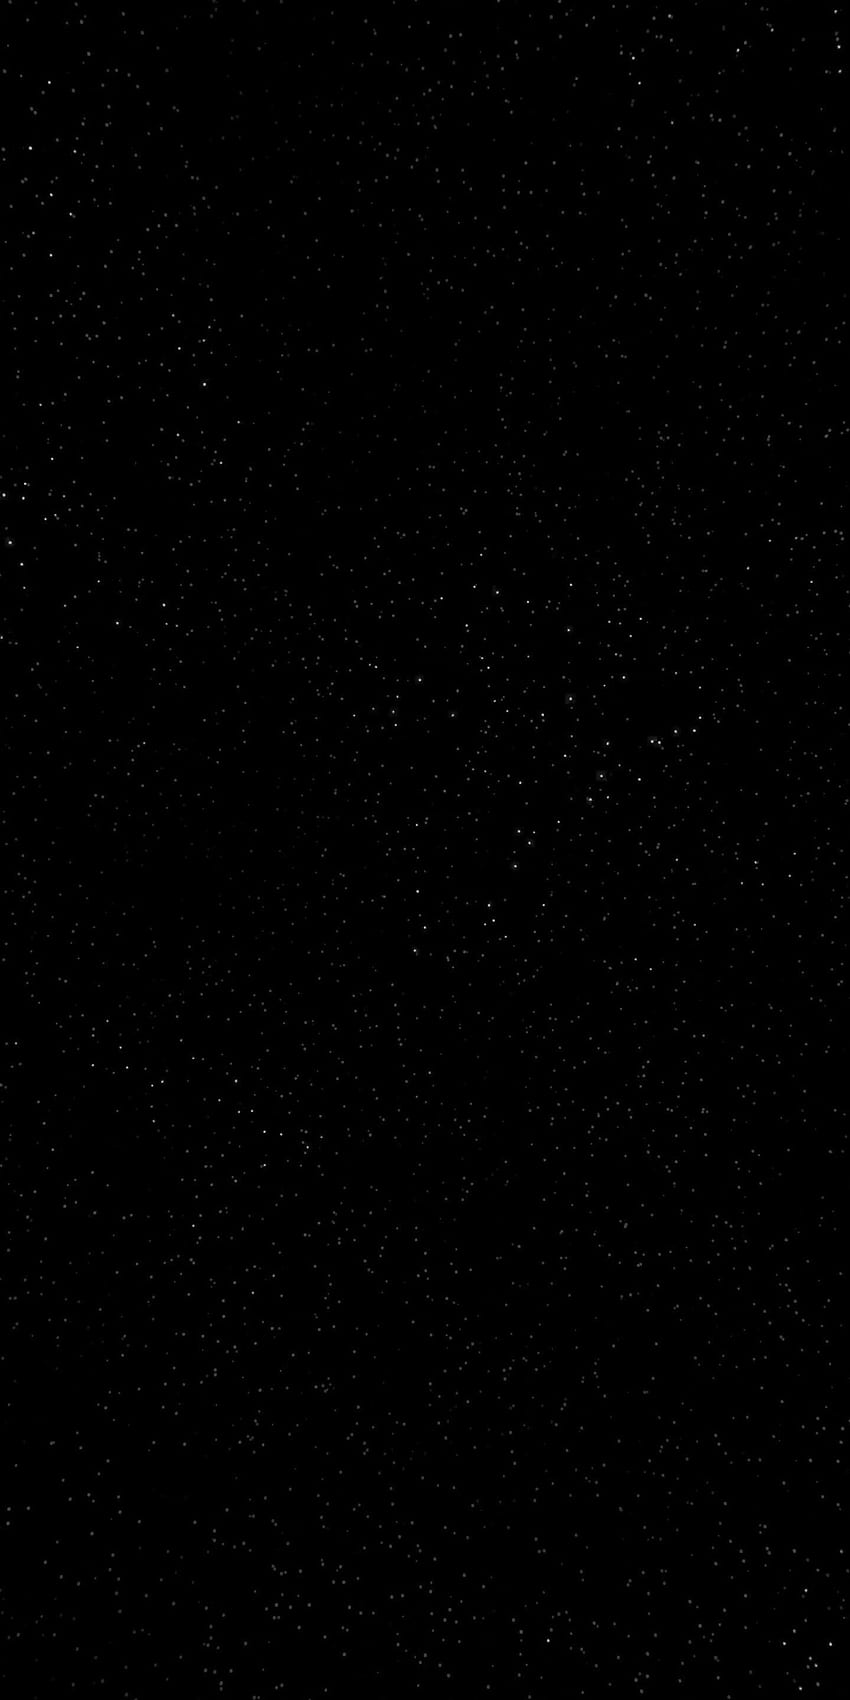 So I wanted a black for my iPhone X but found true black too boring. This is what I found. I think it's by far the cleanest and best looking star, I'm Bored HD phone wallpaper